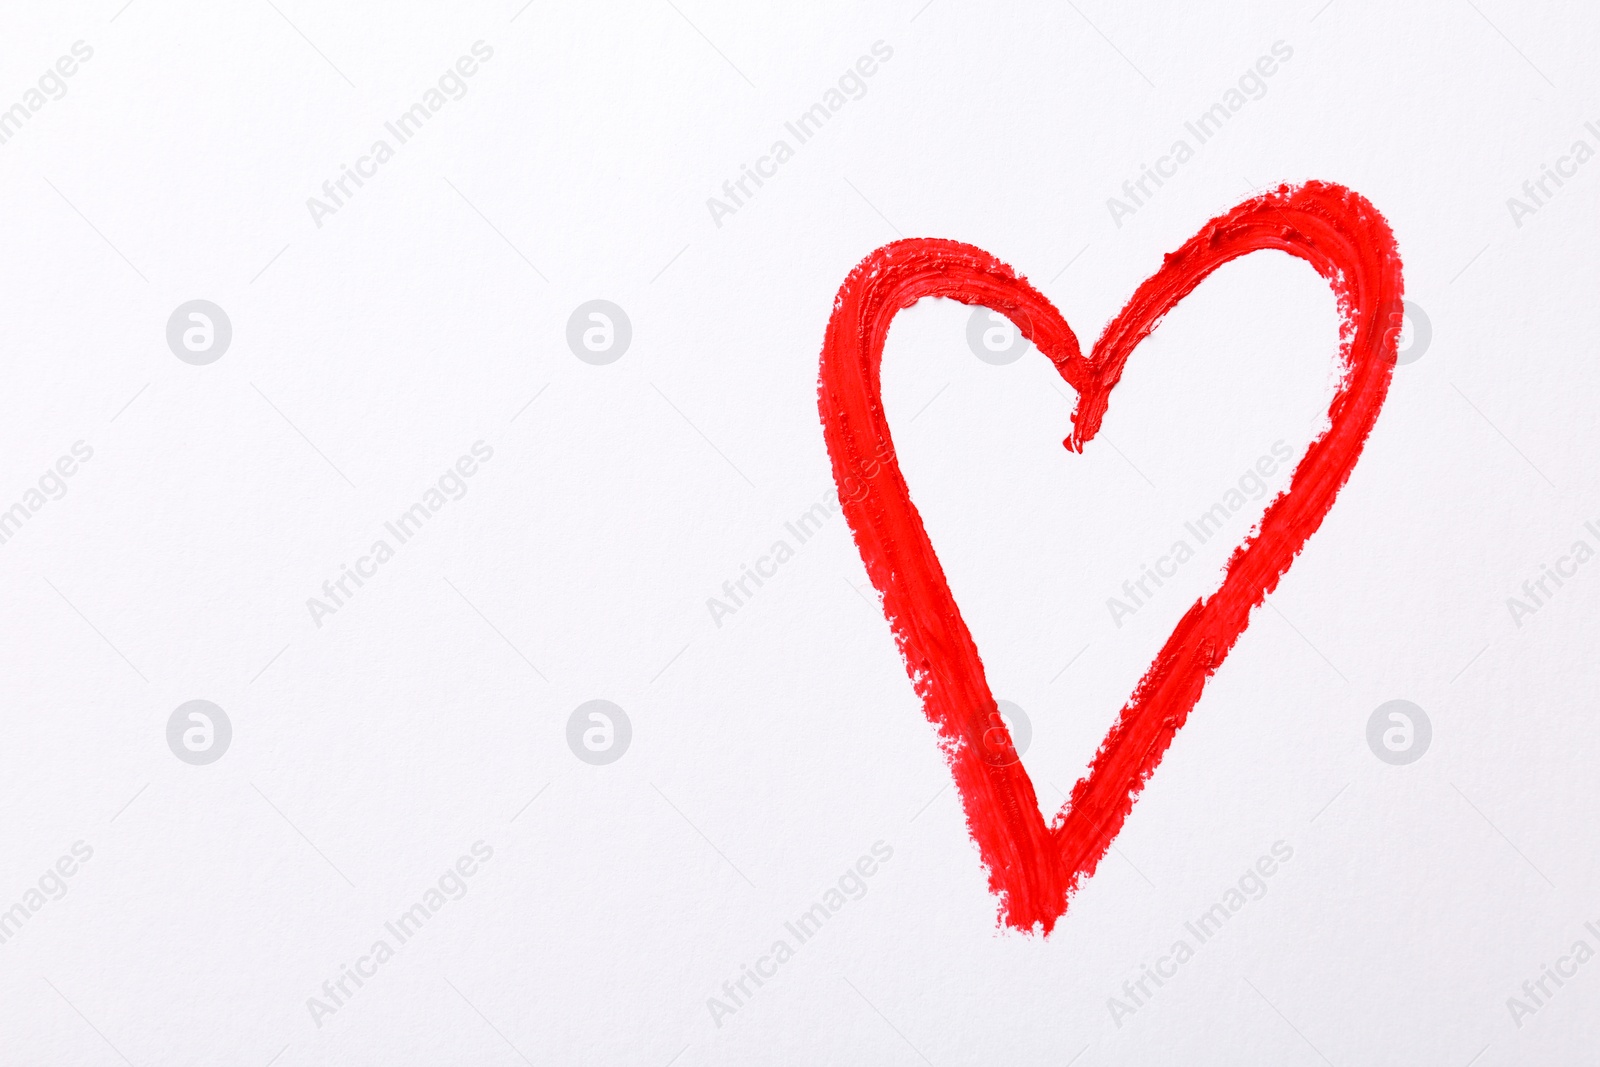 Photo of Heart drawn with red lipstick on white paper, top view